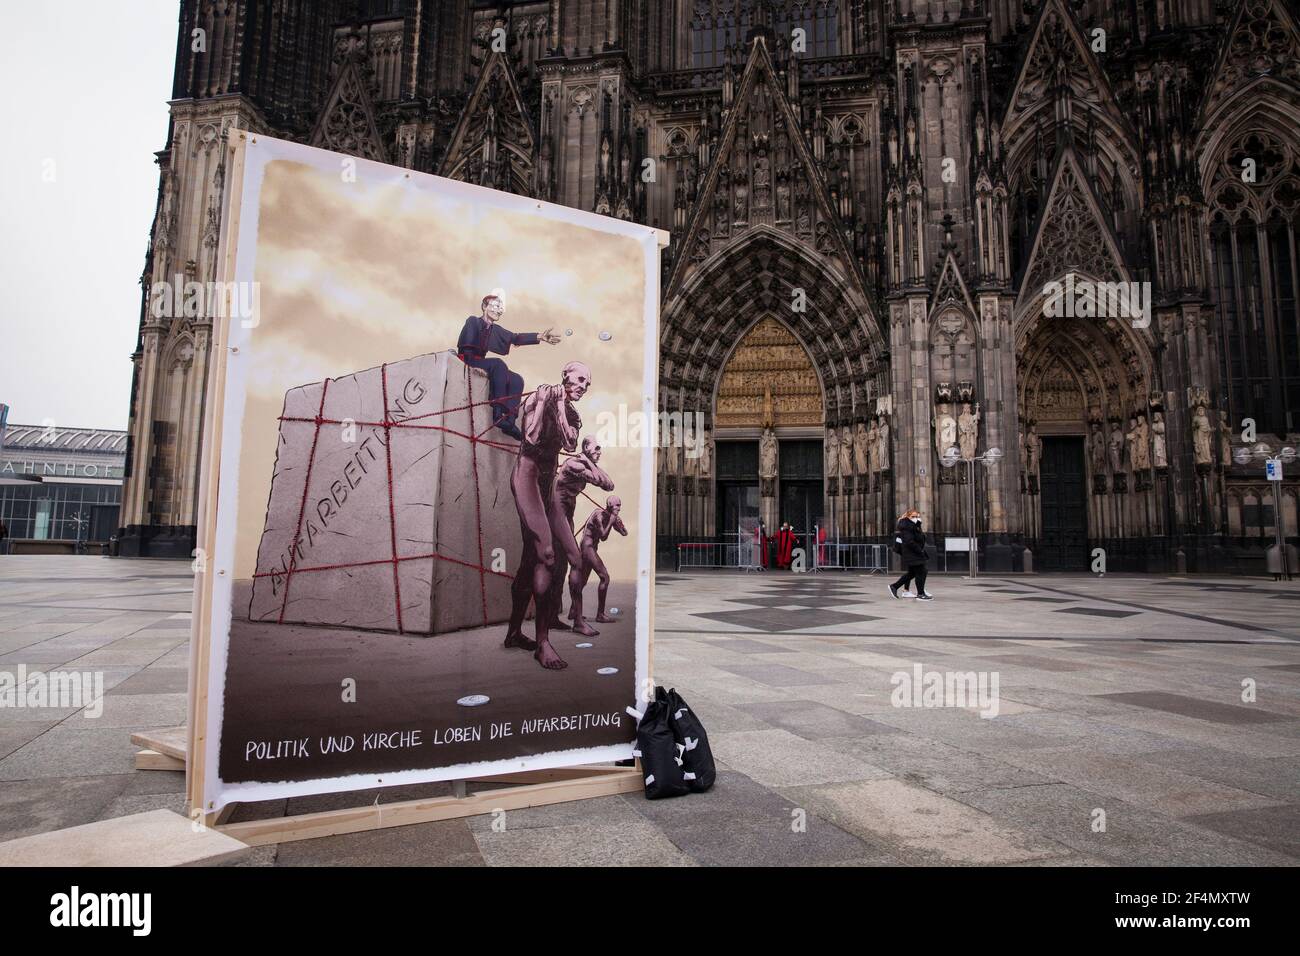 victims' representatives protest against hesitant disclosure of abuse cases by church officials with a poster in front of the cathedral, Cologne, Germ Stock Photo